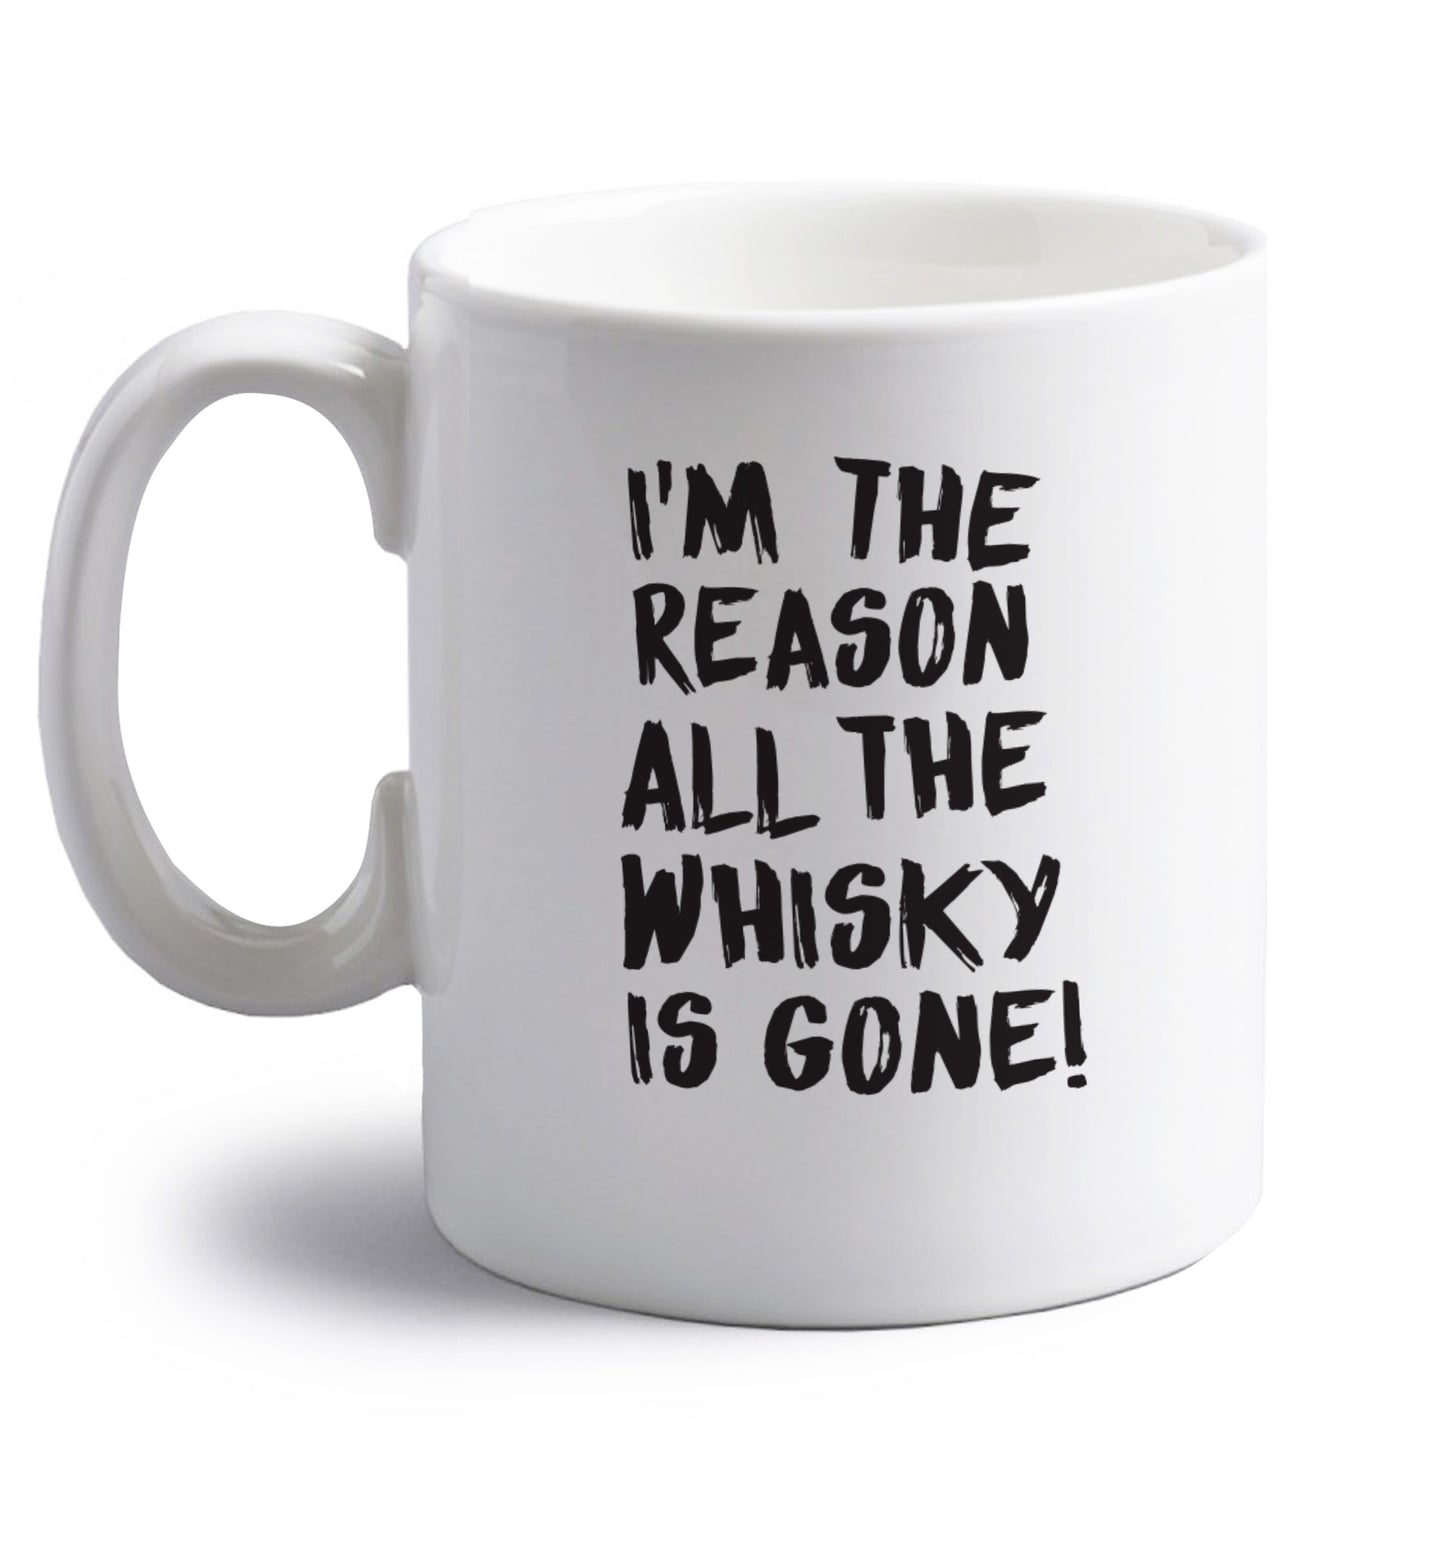 I'm the reason all the whisky is gone right handed white ceramic mug 